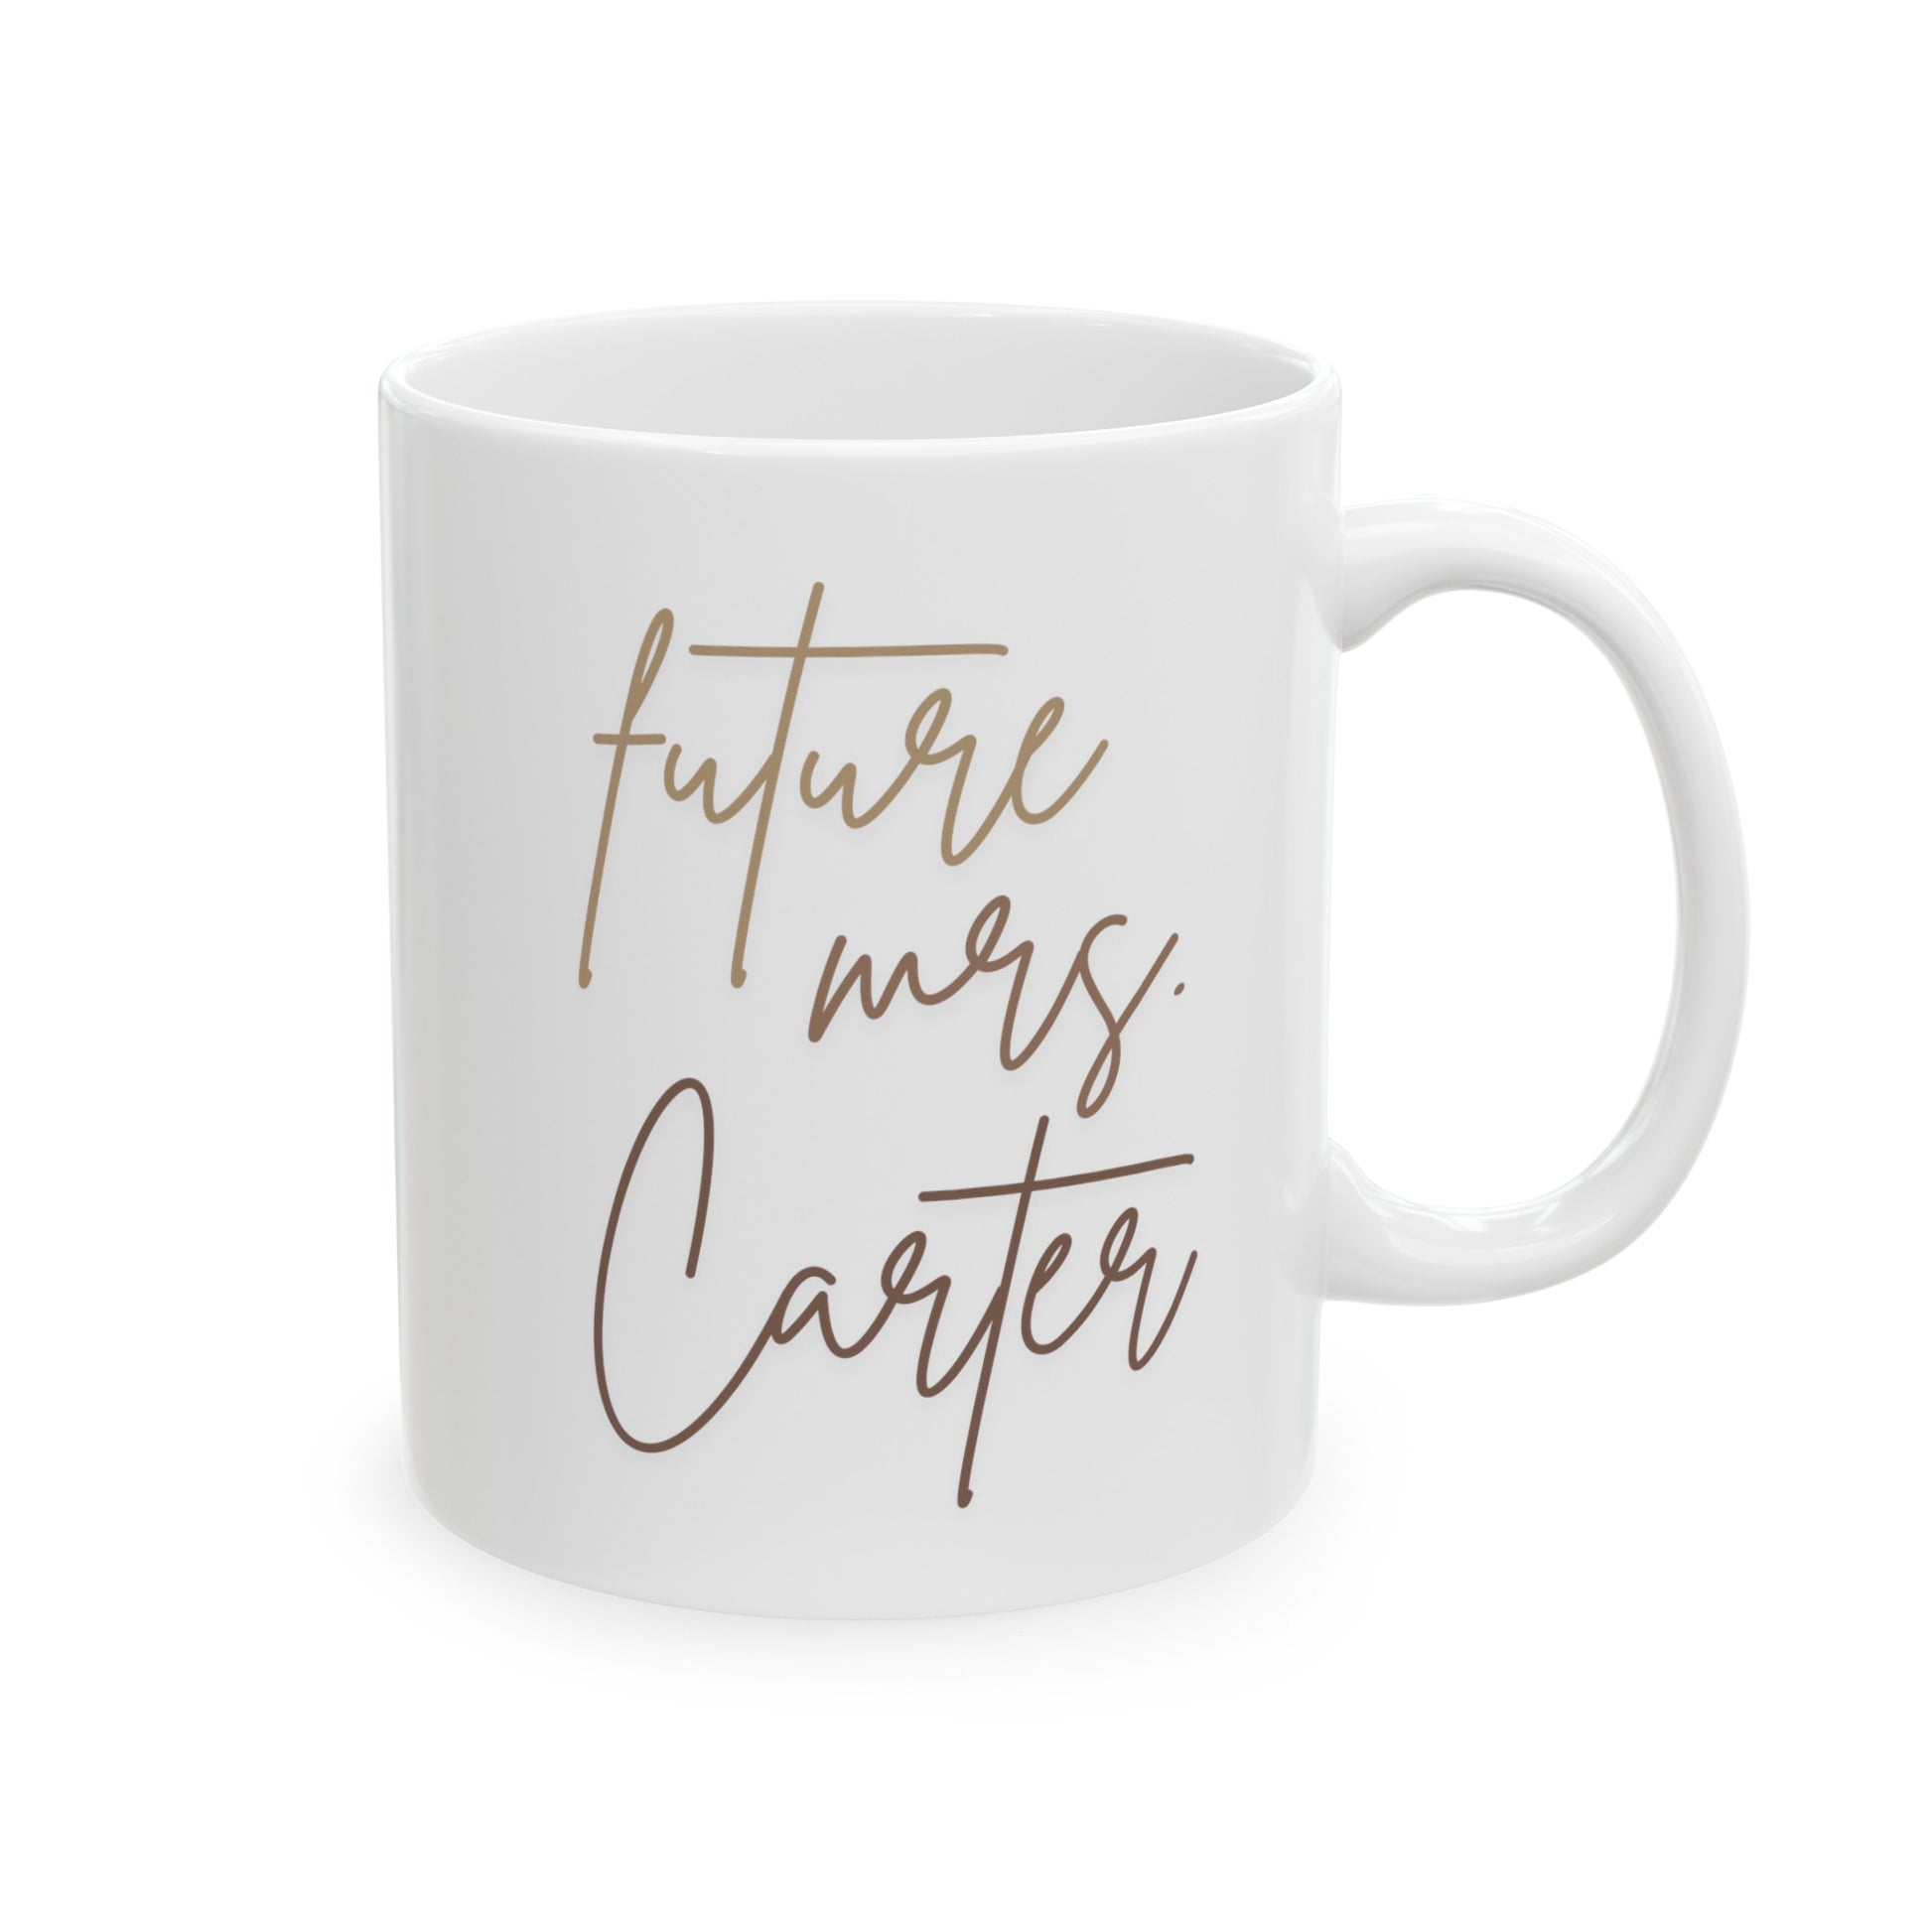 Personalized Future Mrs 11oz white funny coffee mug tea cup gift for bride to be engagement engaged custom name customized waveywares wavey wares wavywares wavy wares